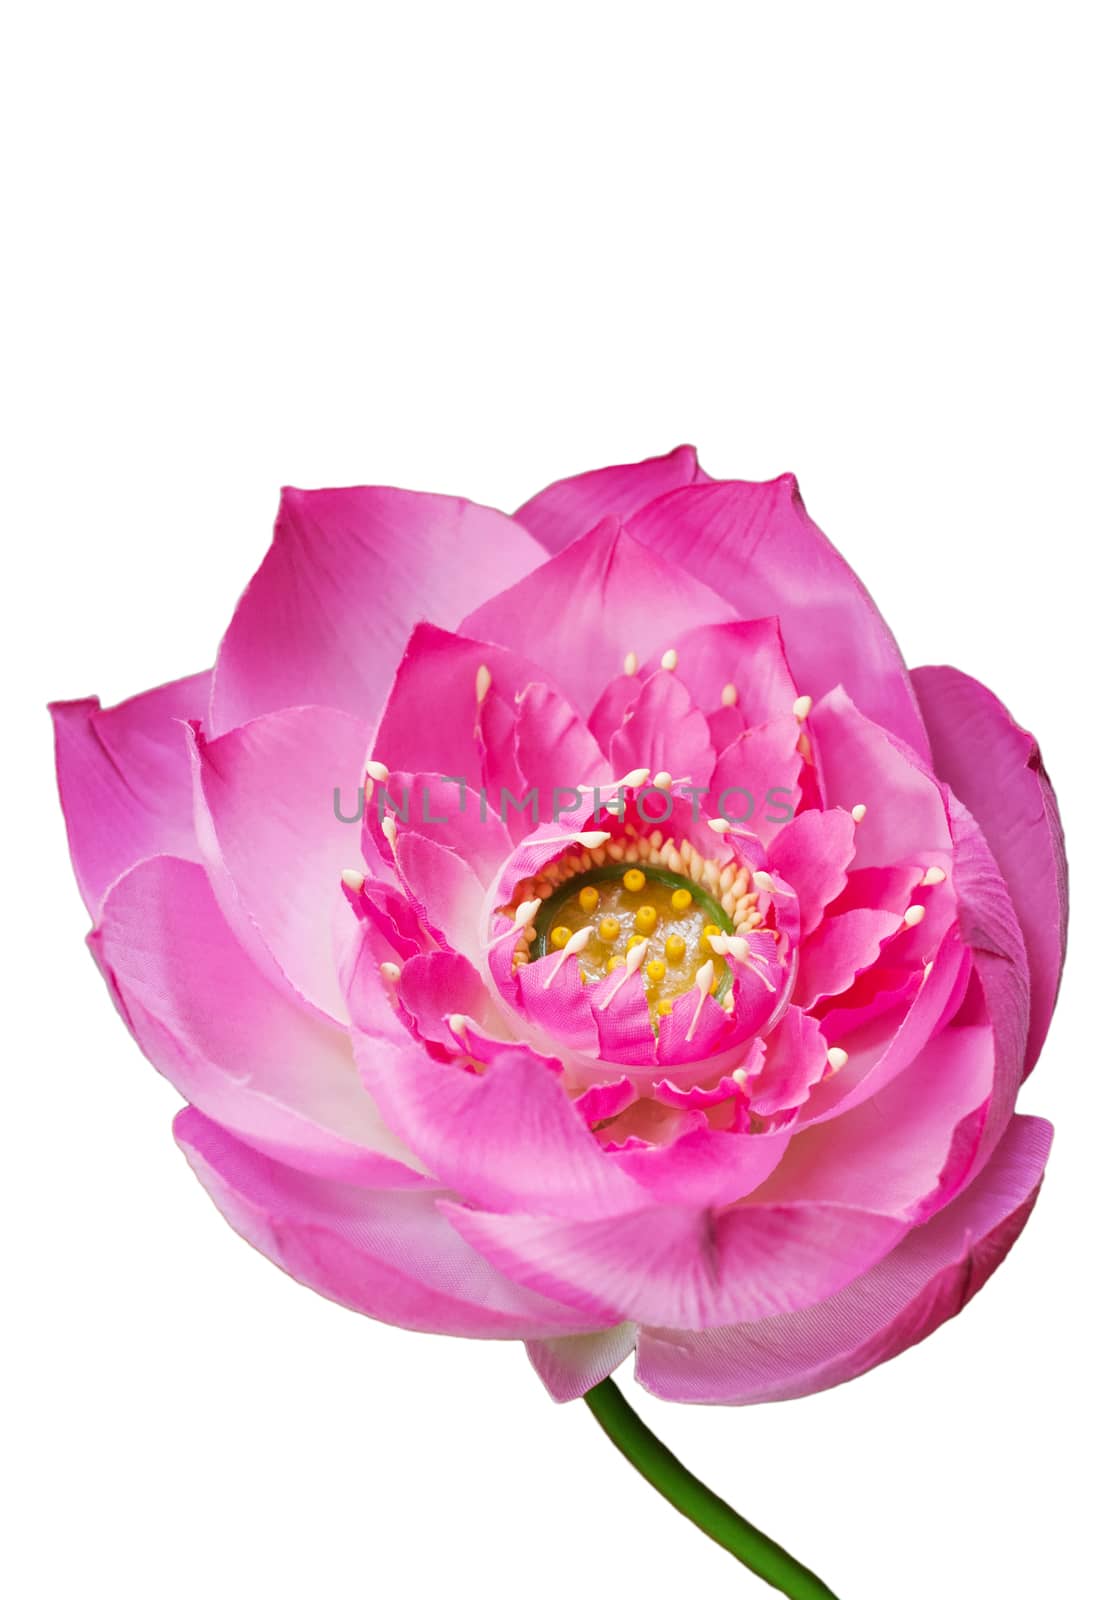 Pink water lily flower (lotus) and white background, Artificial lotus flower is a important symbol in Asian culture, Clipping path